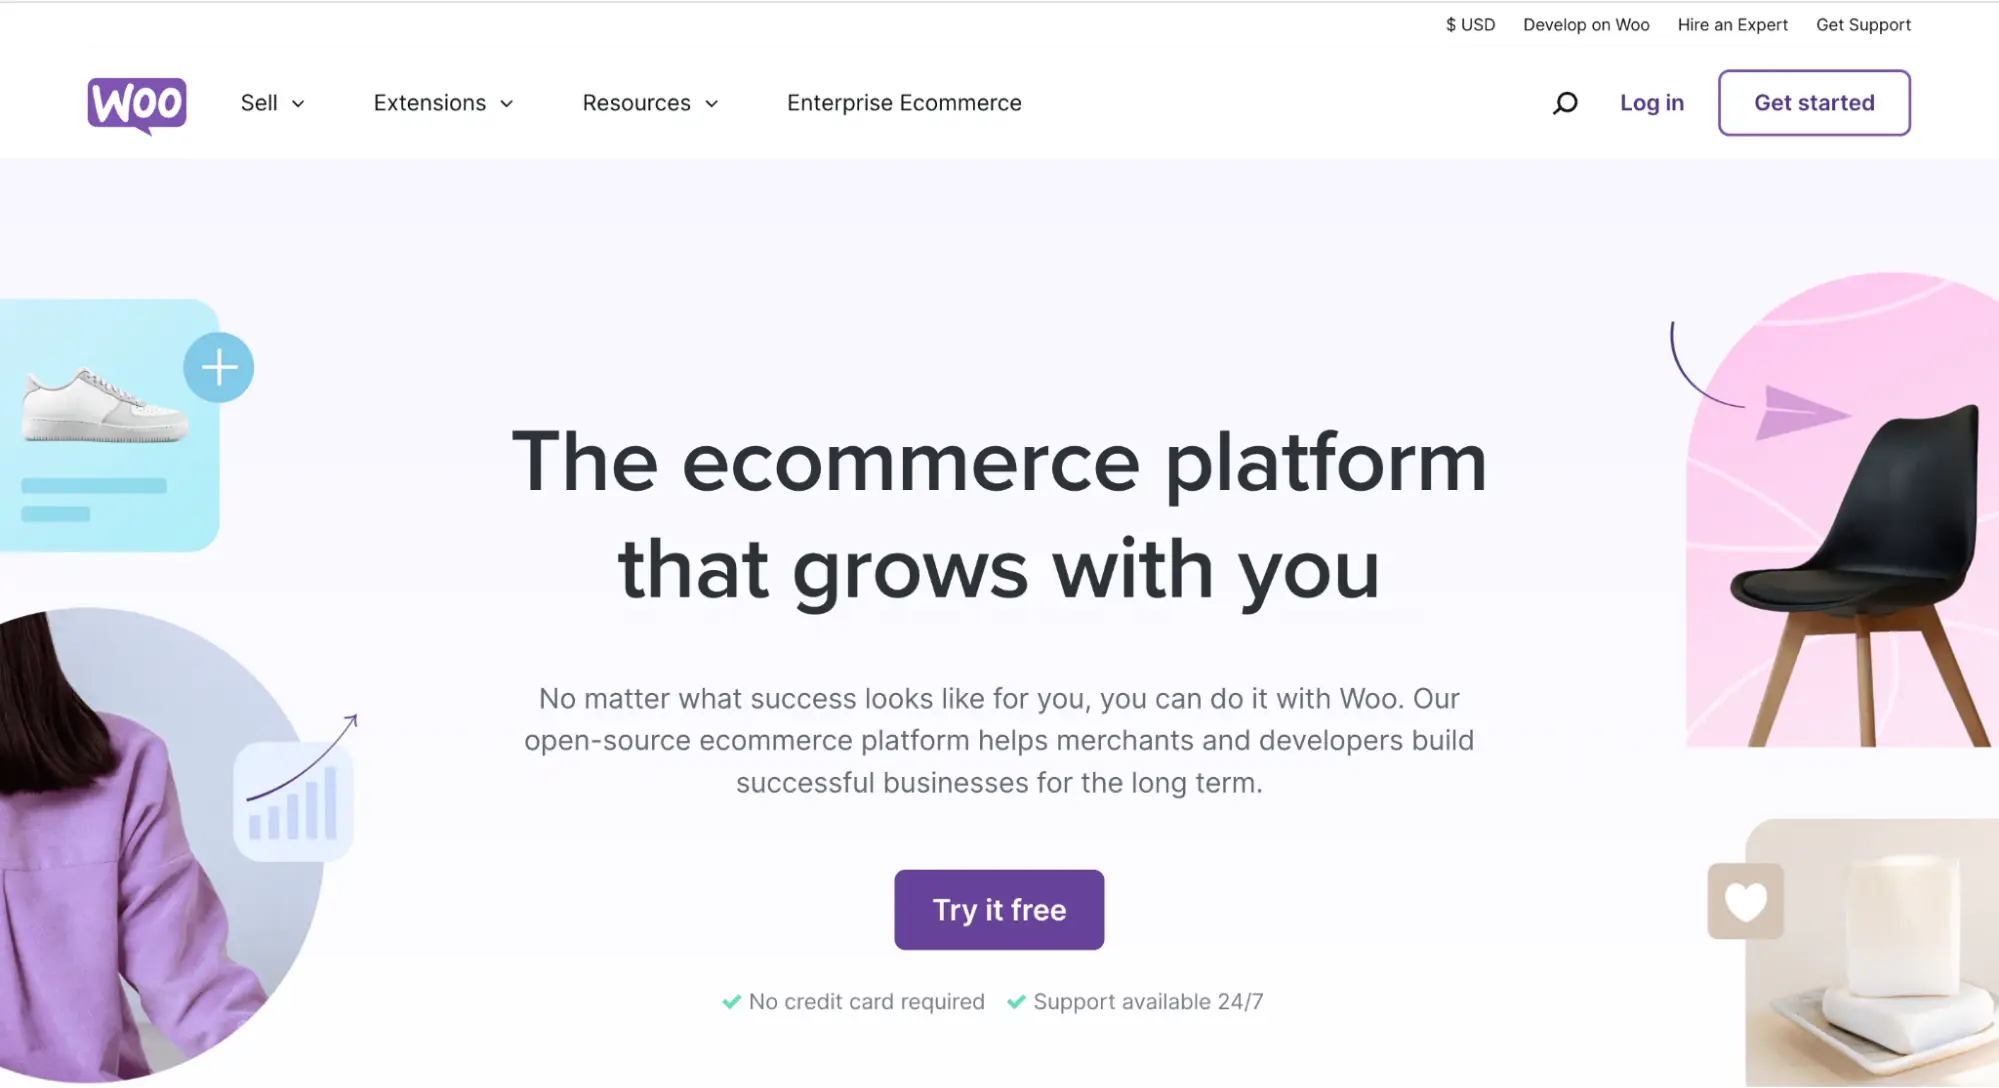 WooCommerce comes with a customizable dashboard